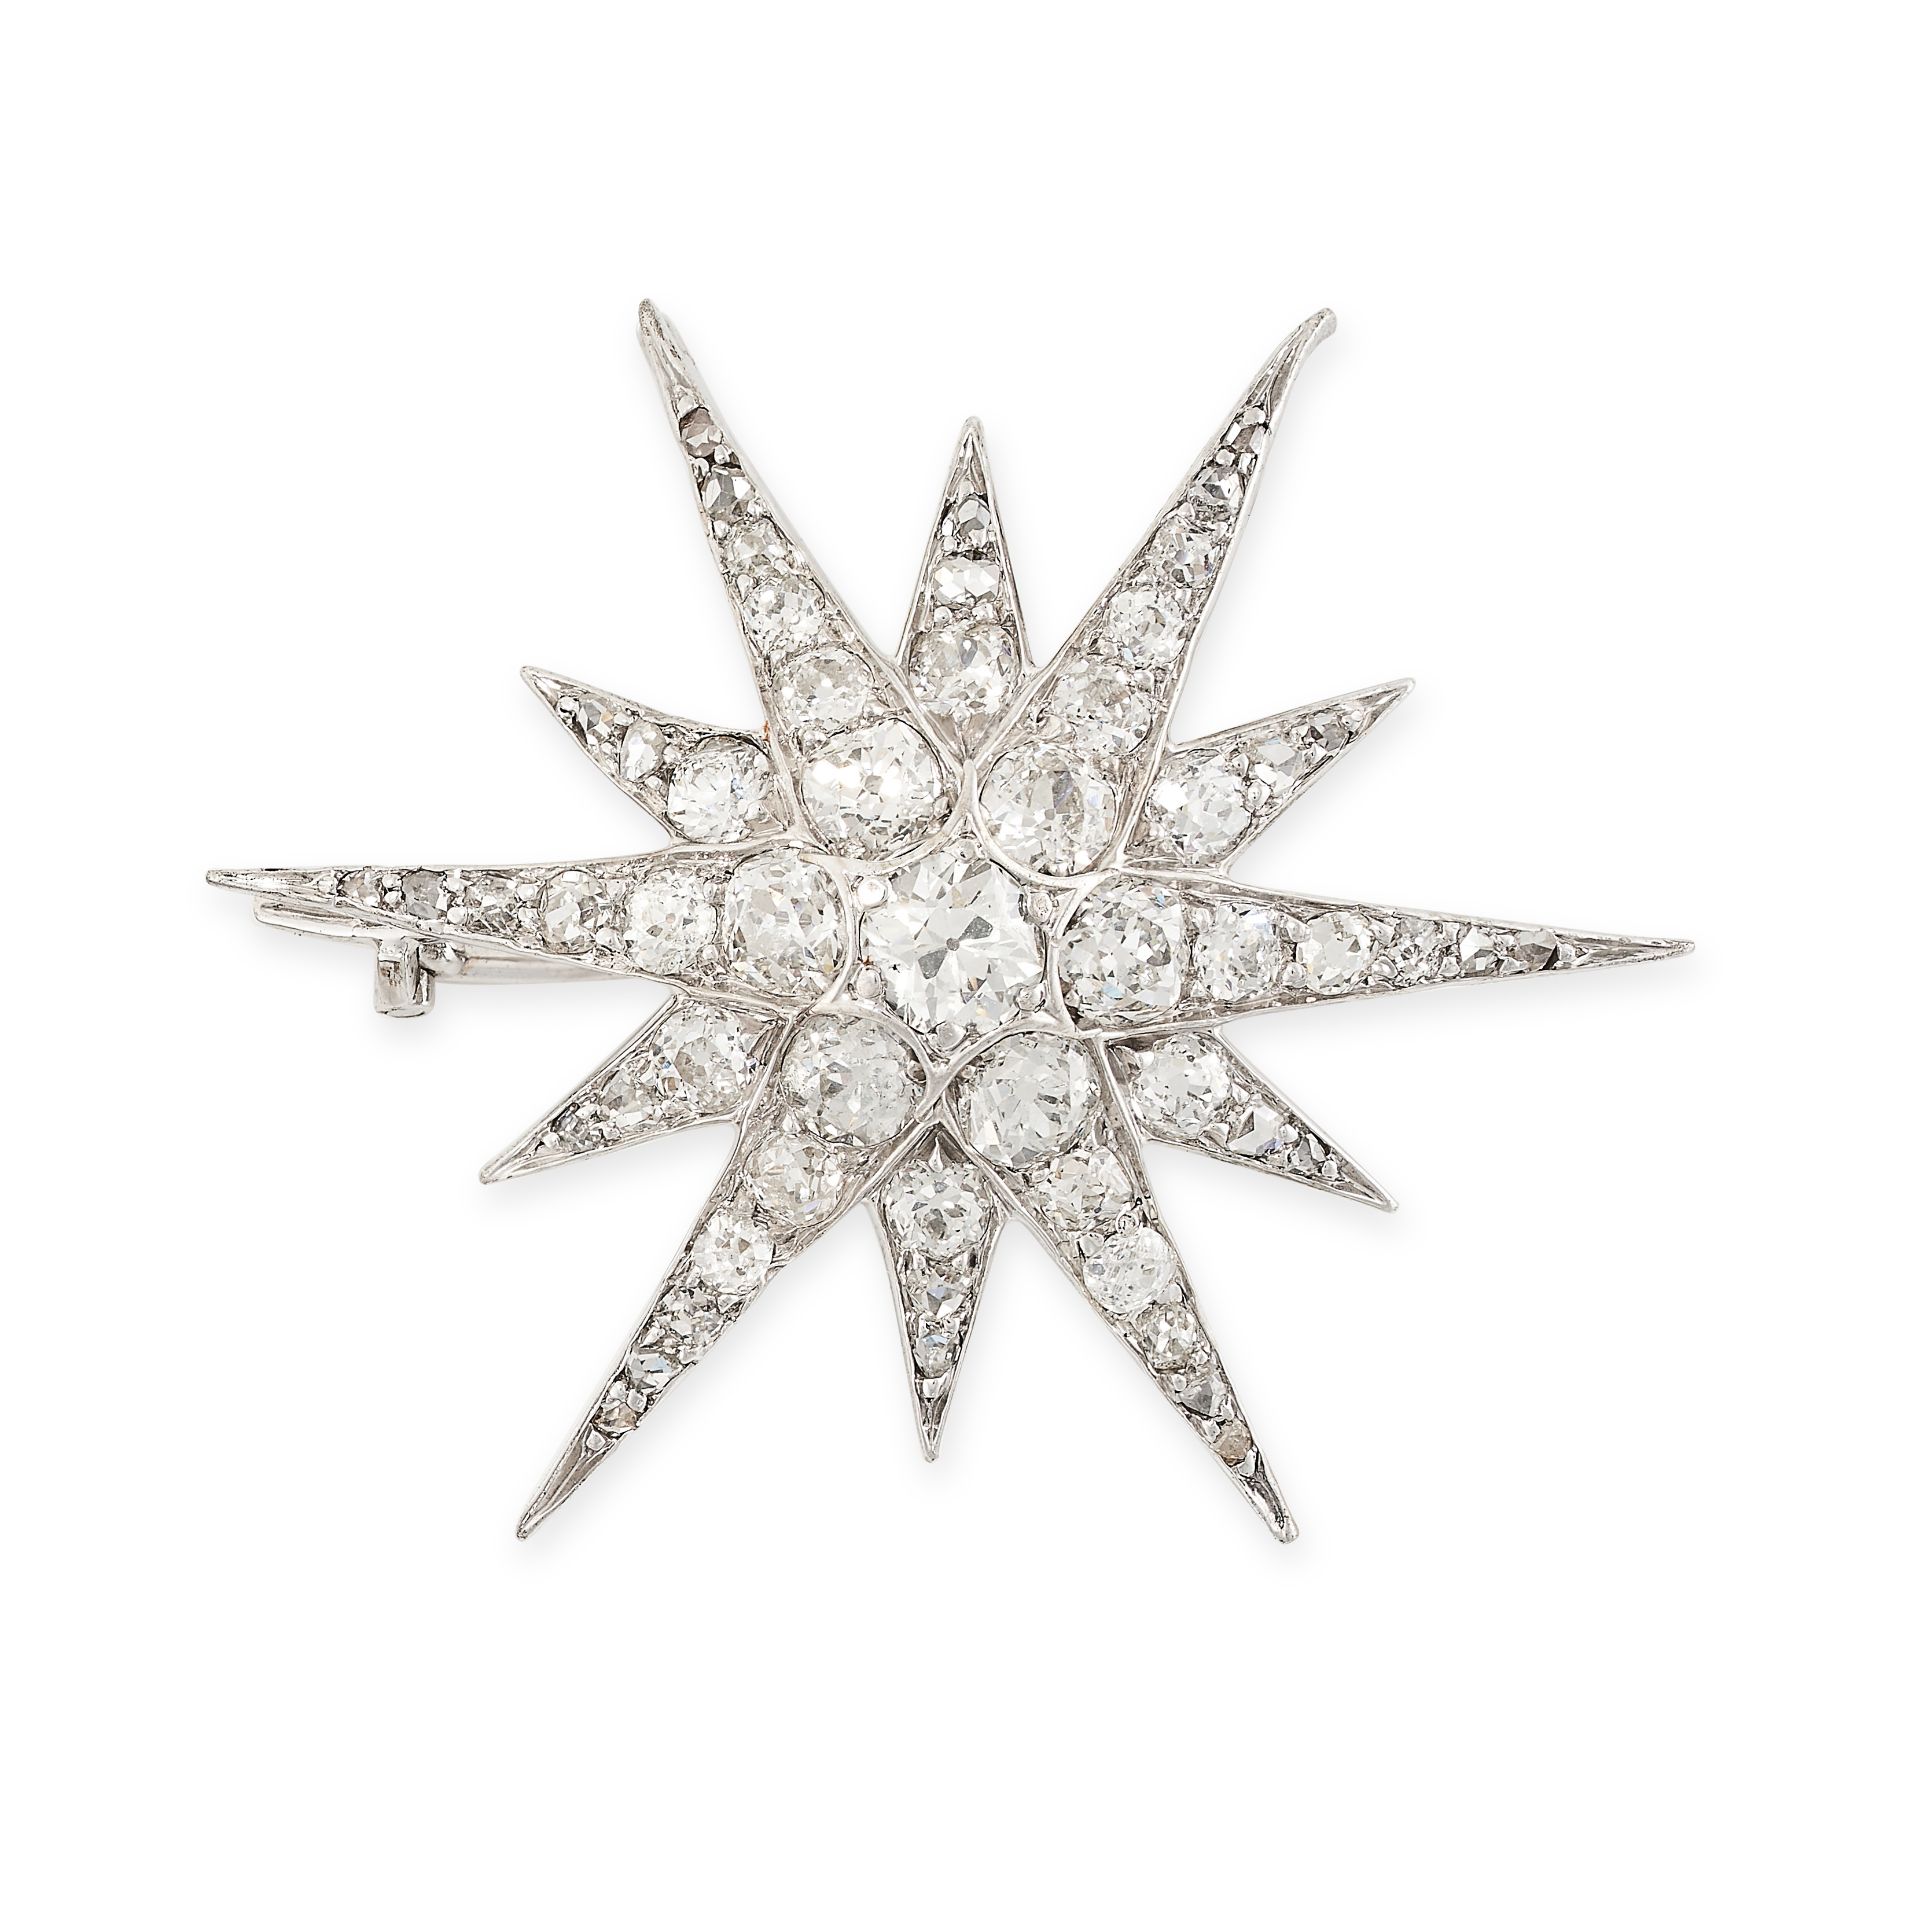 A DIAMOND STAR BROOCH in white gold, designed as a twelve rayed star, set throughout with old cut